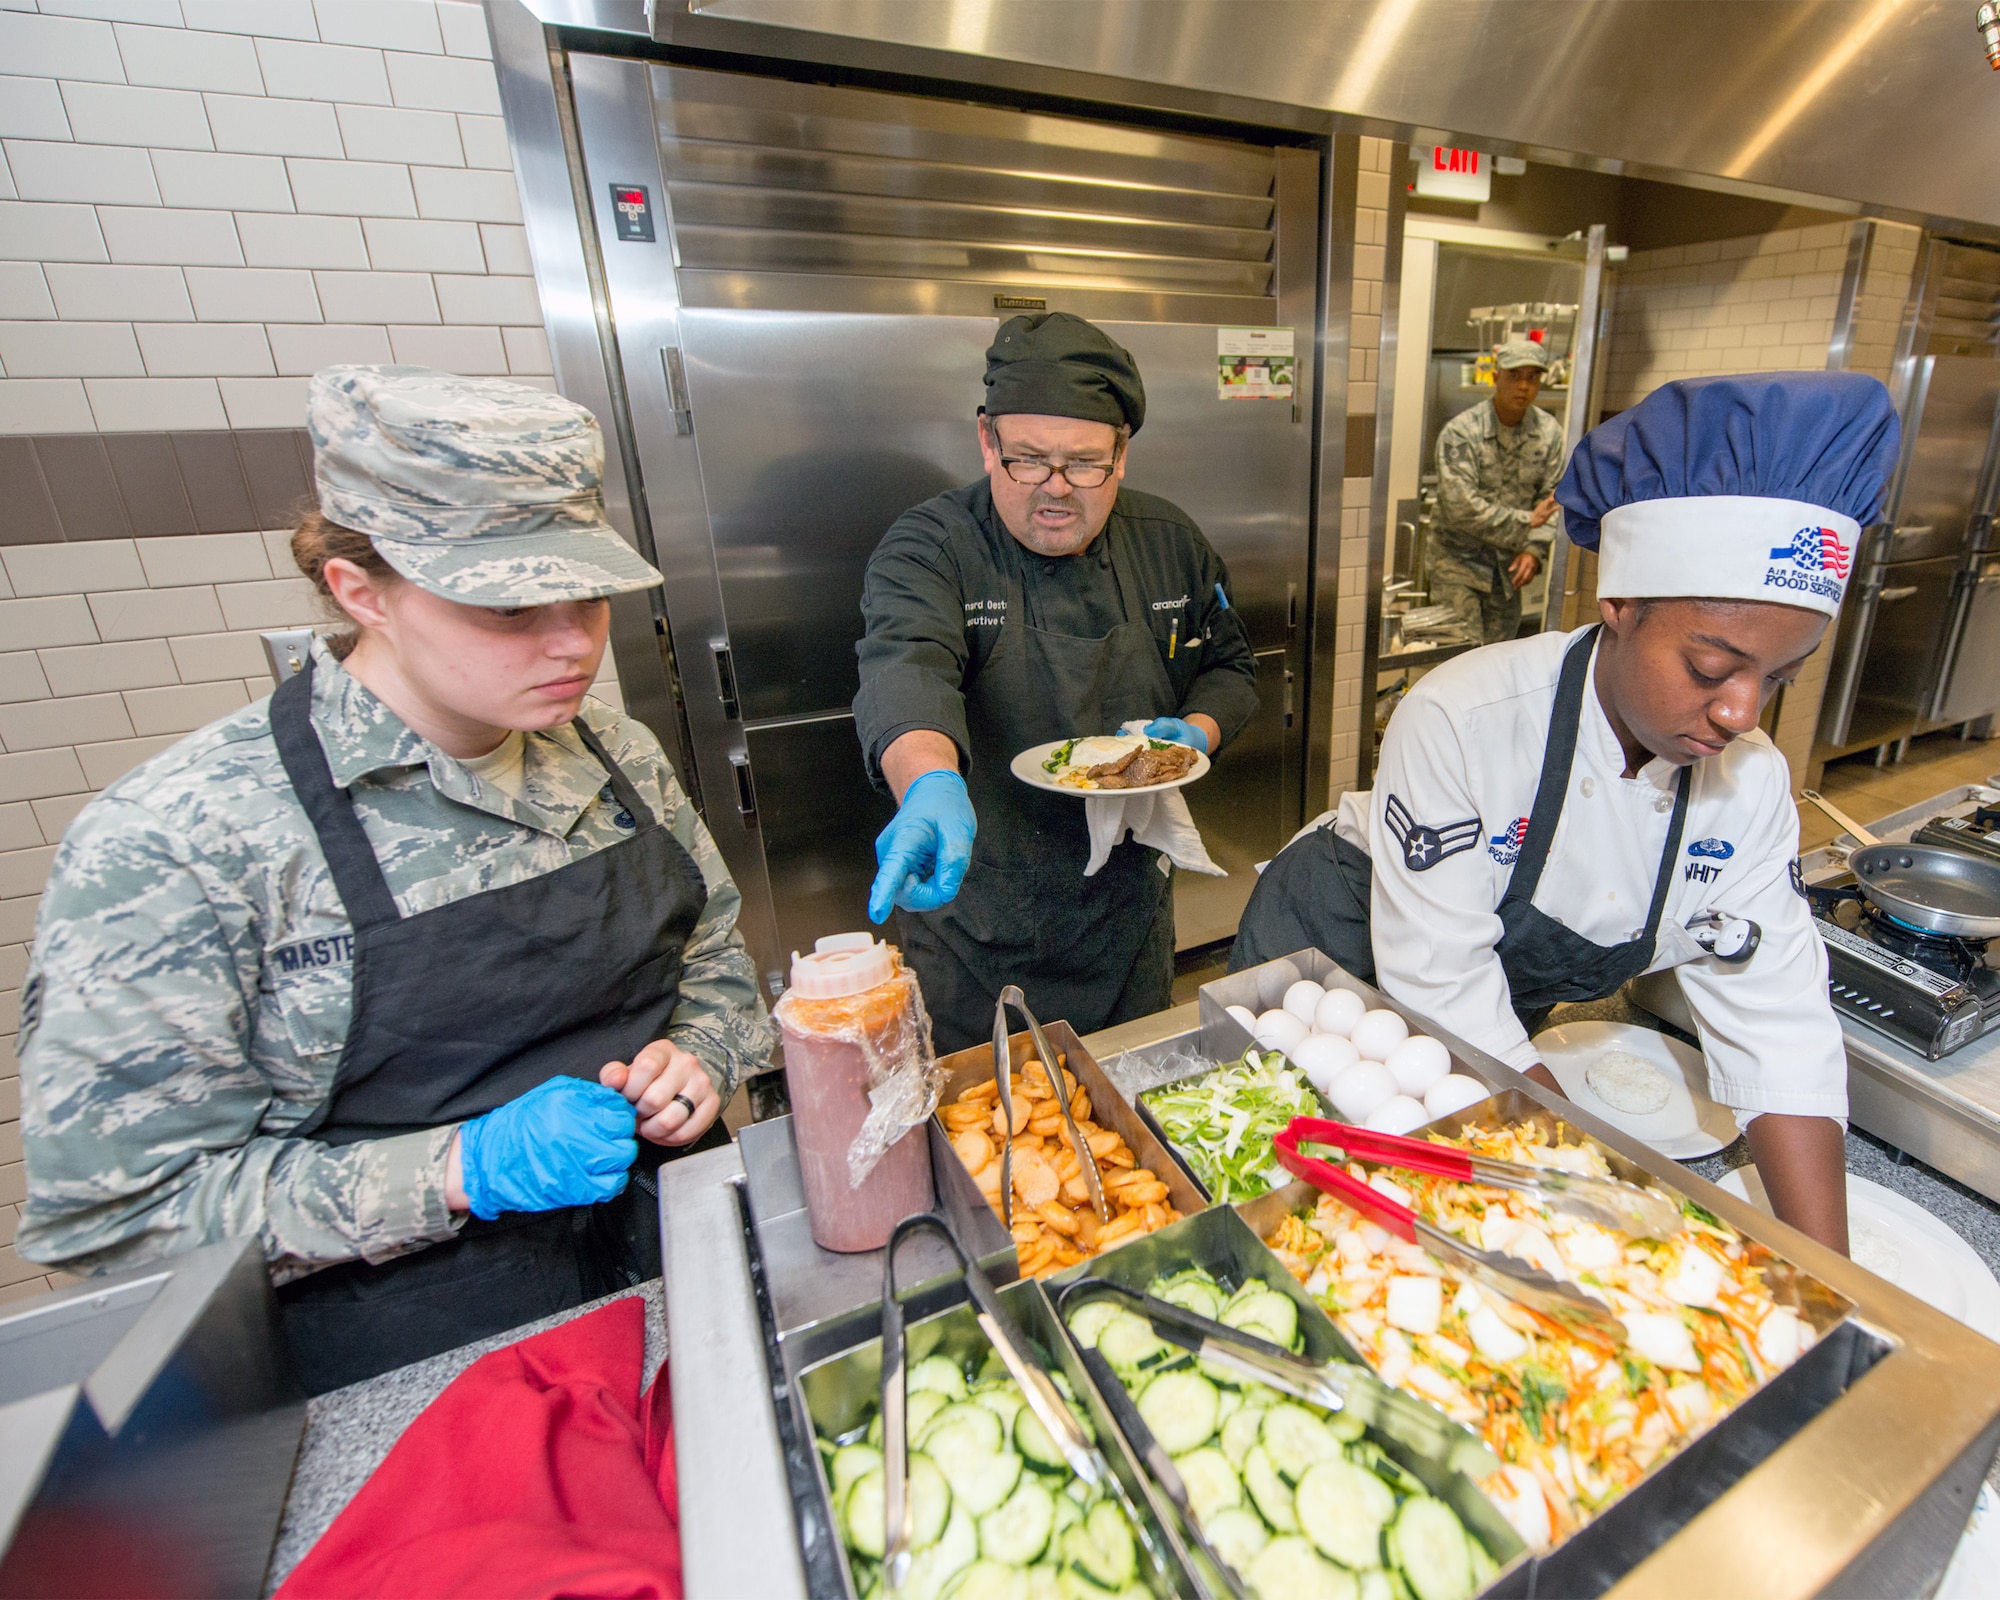 U.S. Air Force Senior Airman Kylee Masters Thomas (left), Maynard Oestreich, executive chef for Aramark, and Airman 1st Class Cierra White (Right), prepare meals prior to the BIBIM Box tasting featuring Korean food at Sierra Inn Dining Facility, Travis Air Force Base, Calif., June 29, 2017. Oestreich a former U.S. Navy veteran and an award-winning chef from Napa Valley, Calif., took the head chef position so he could mentor young Airmen. (U.S. Air Force photo by Louis Briscese)